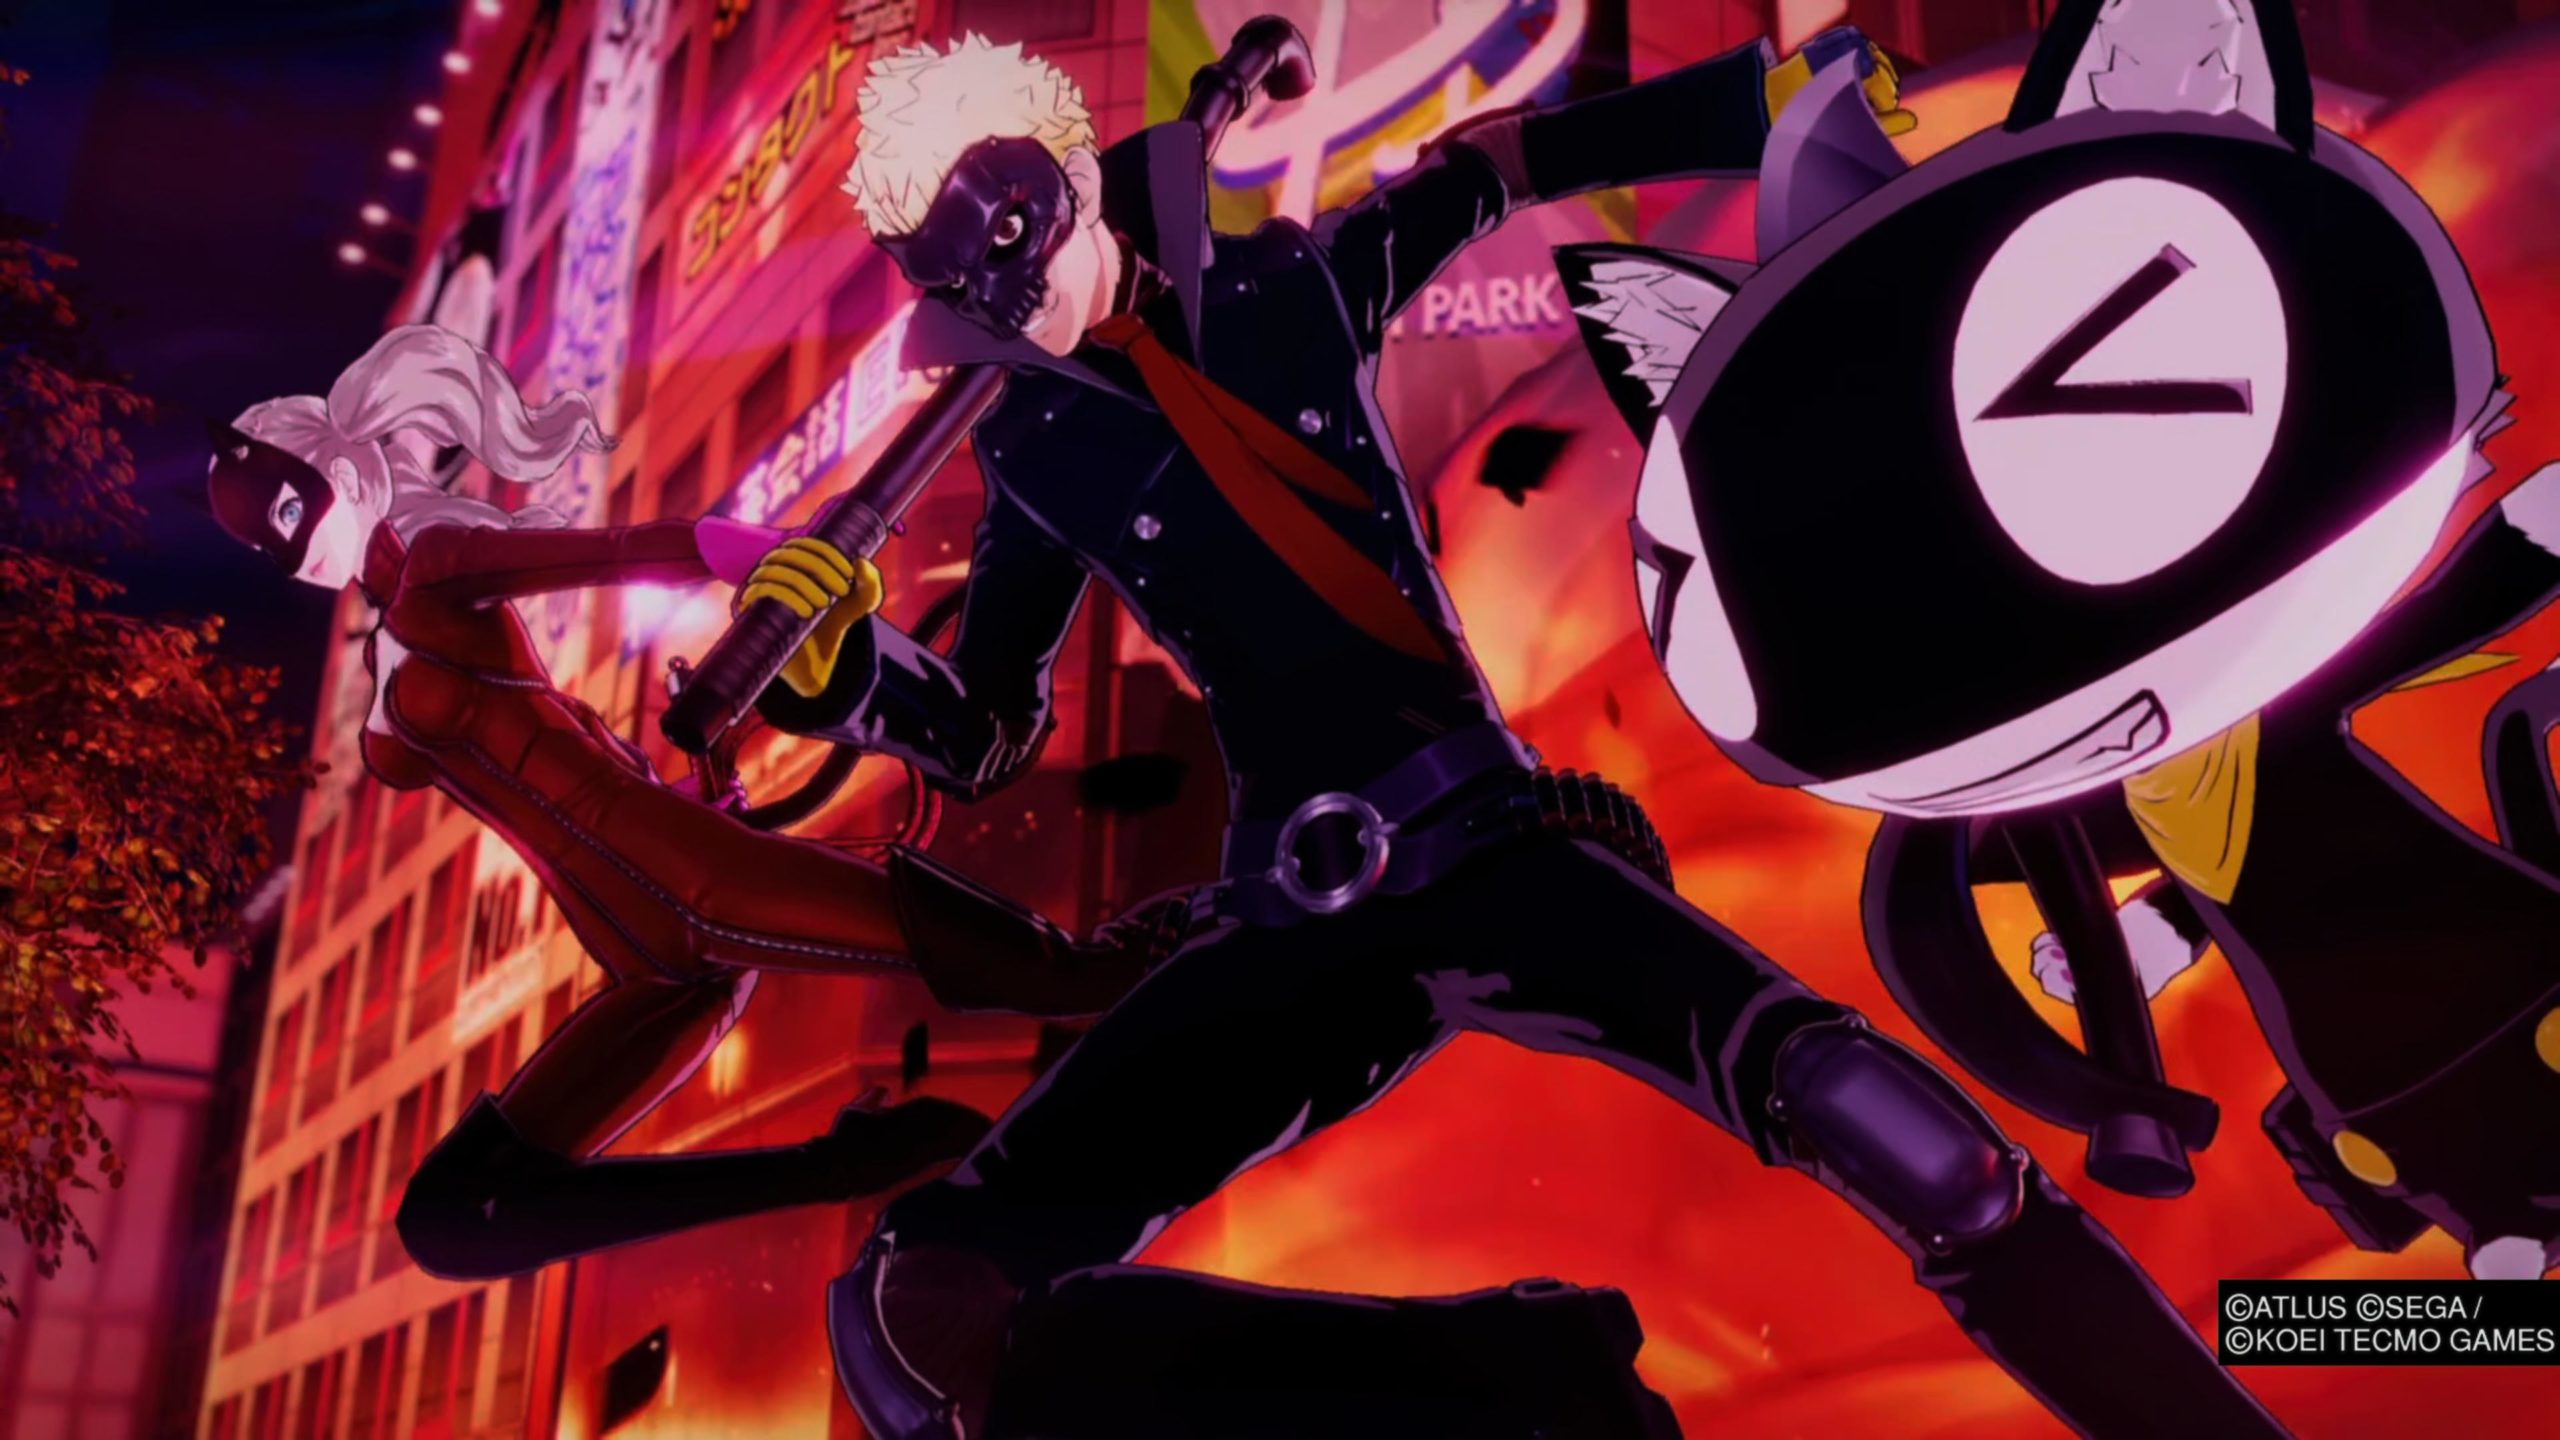 AU Deal Alert: Pre-Order Persona 5 Strikers For PS4 Or Switch